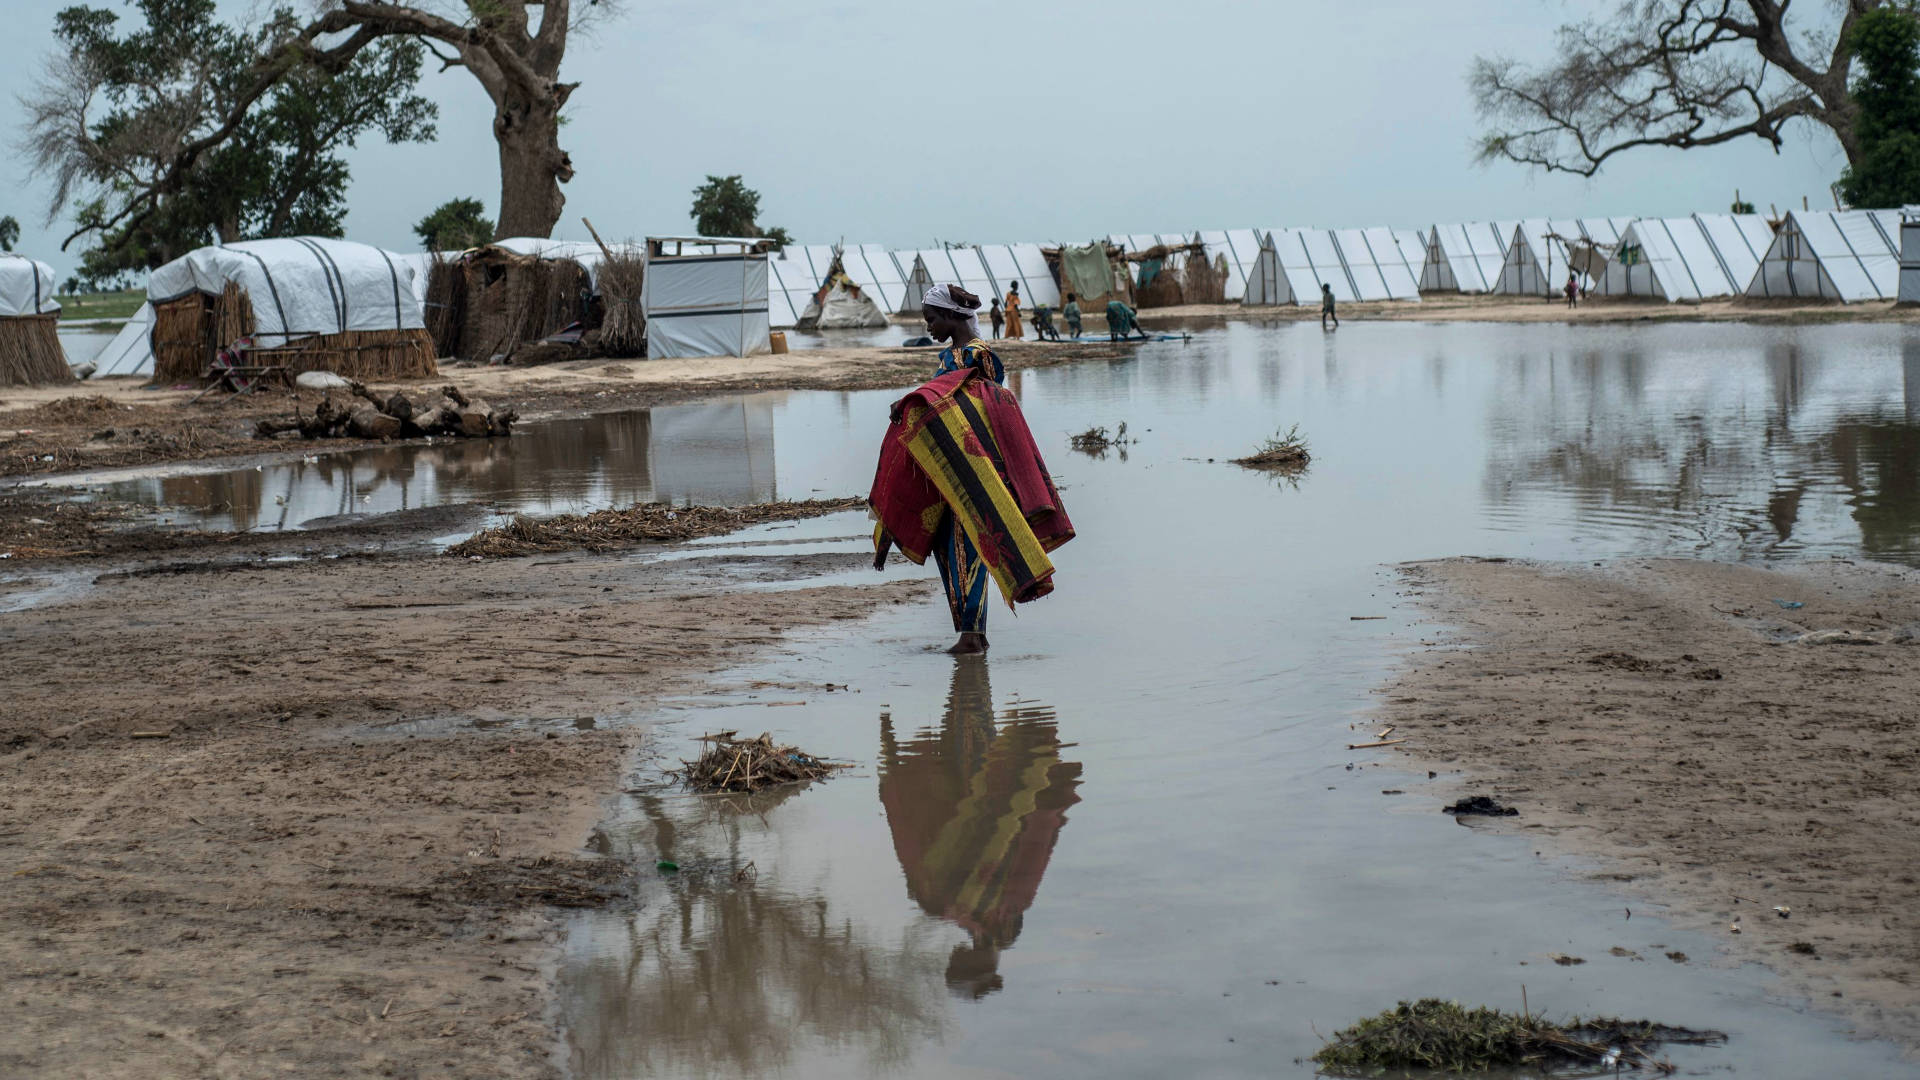 In July 2017, a woman stands in a pool of water created by heavy rainfall in an internally displaced persons camp in northeast Nigeria.